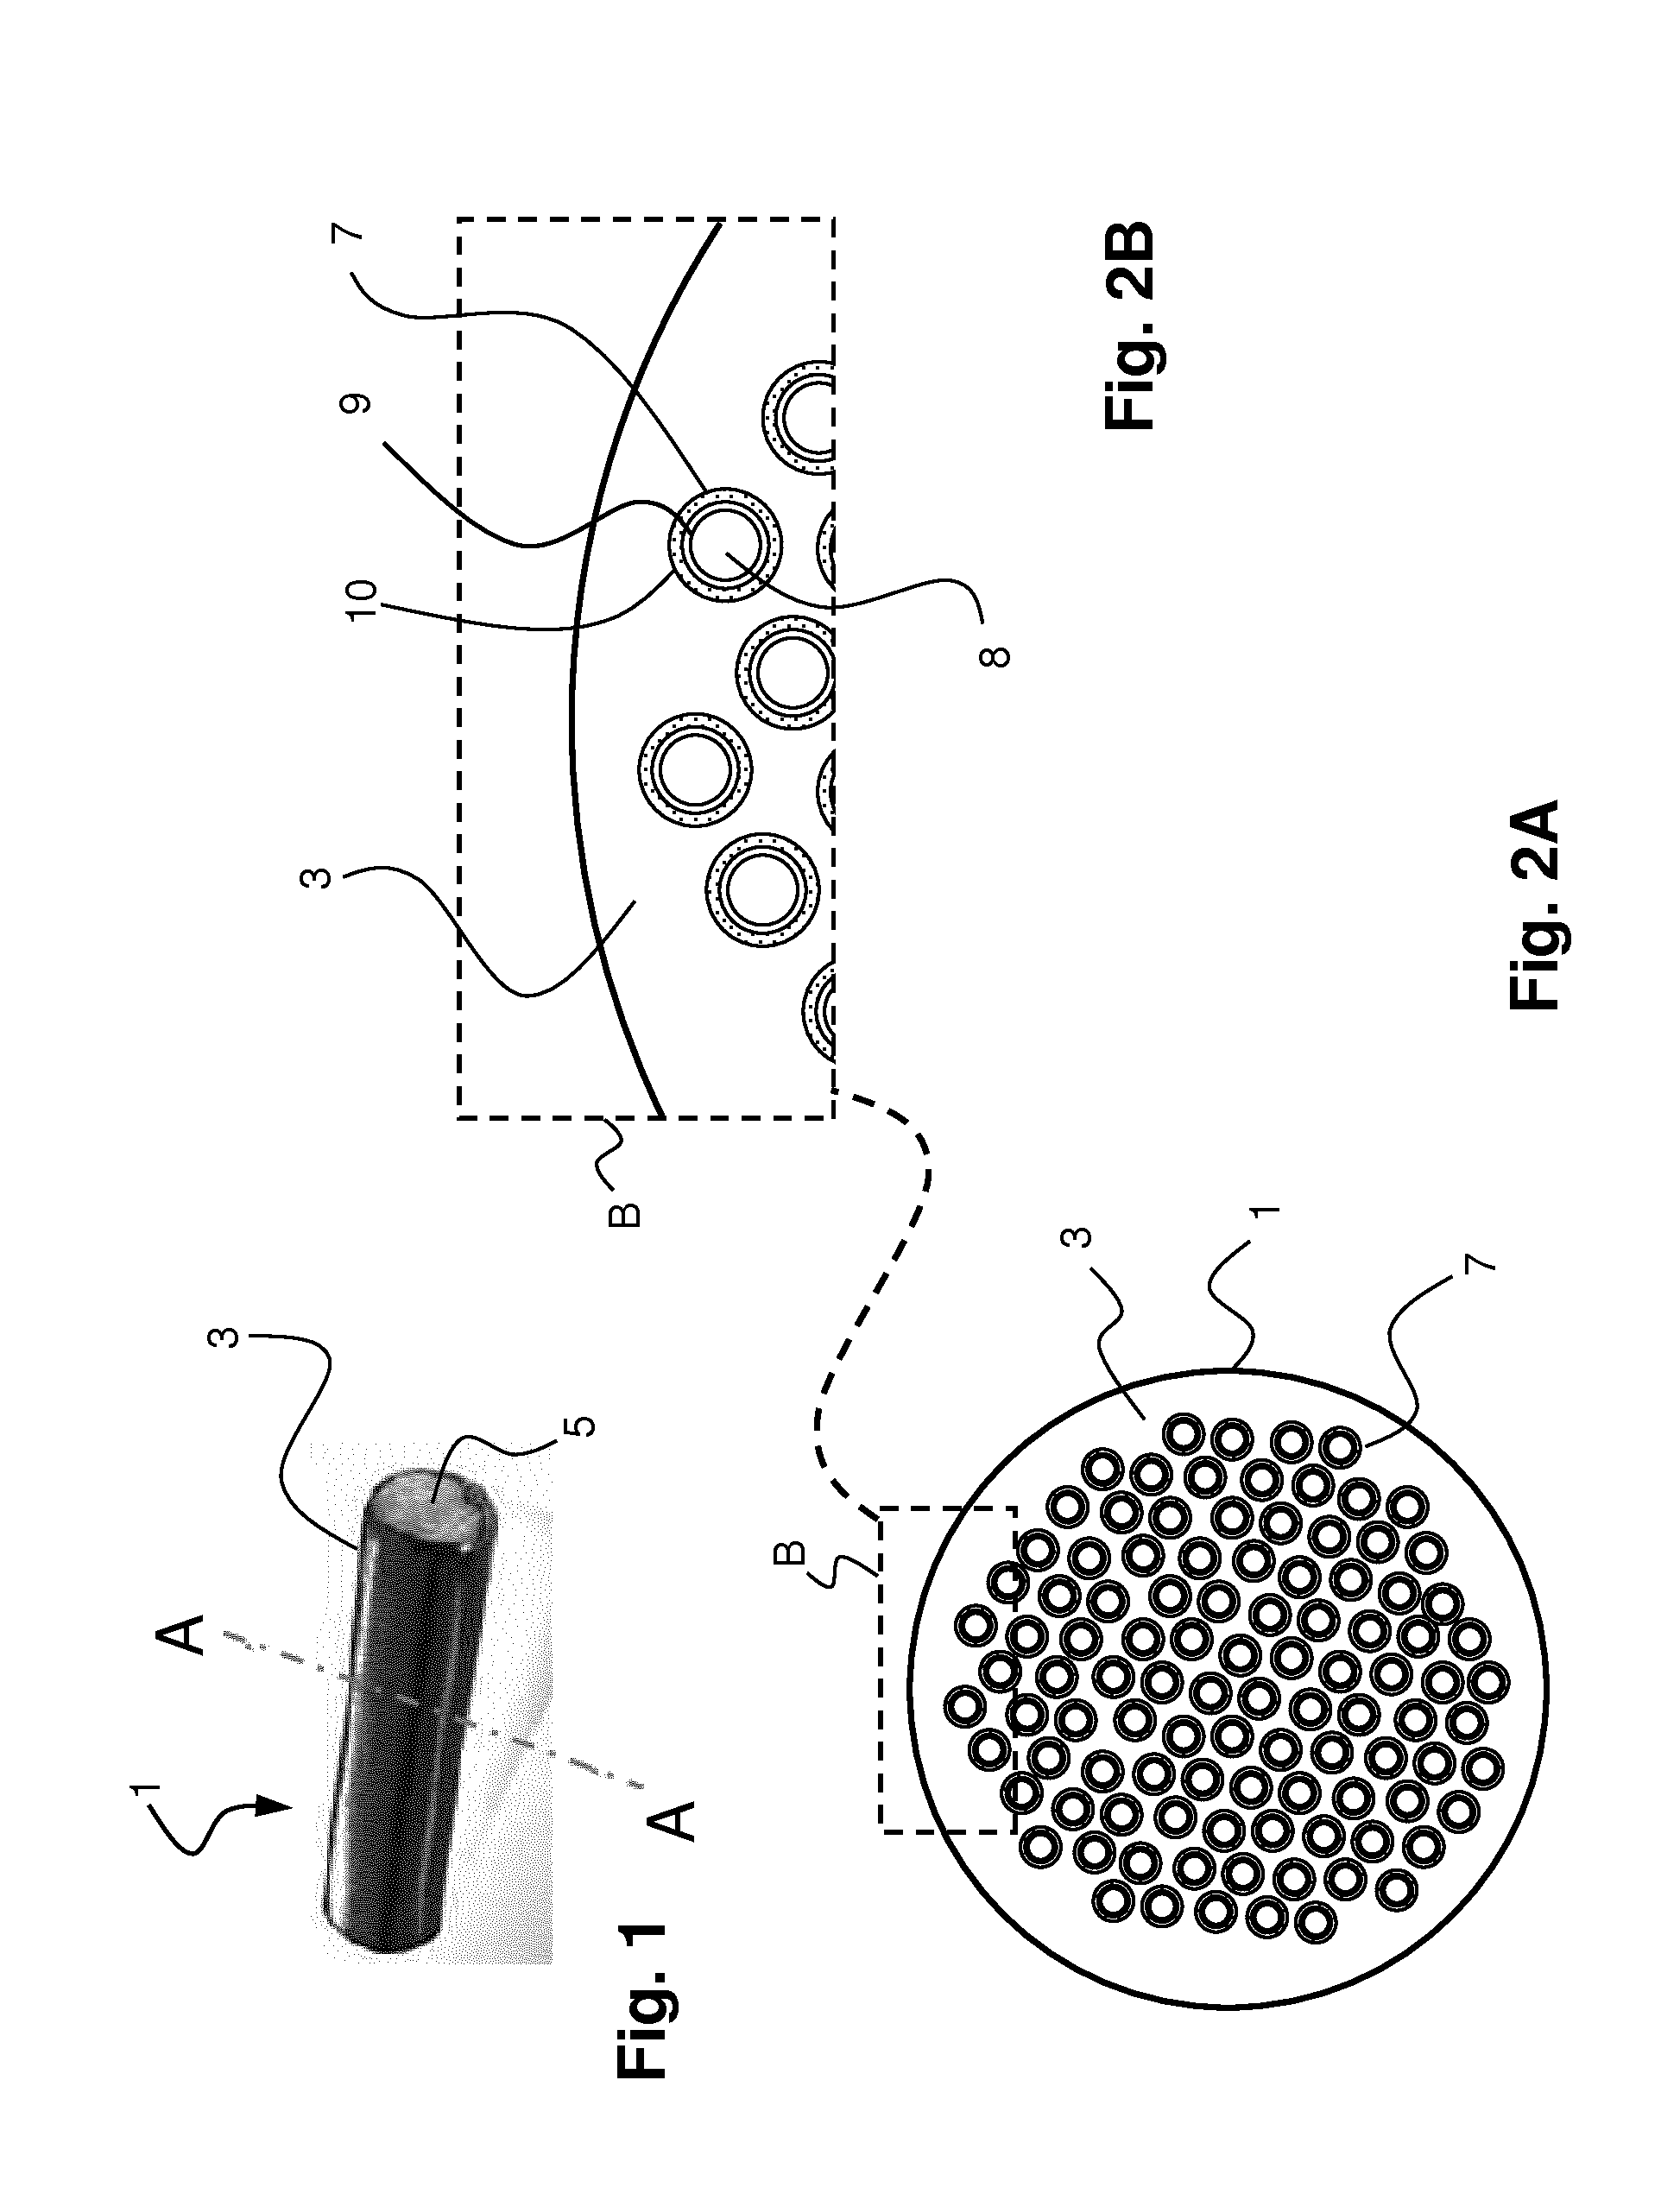 Method and device for manufacturing of a fibre-reinforced polymer composition